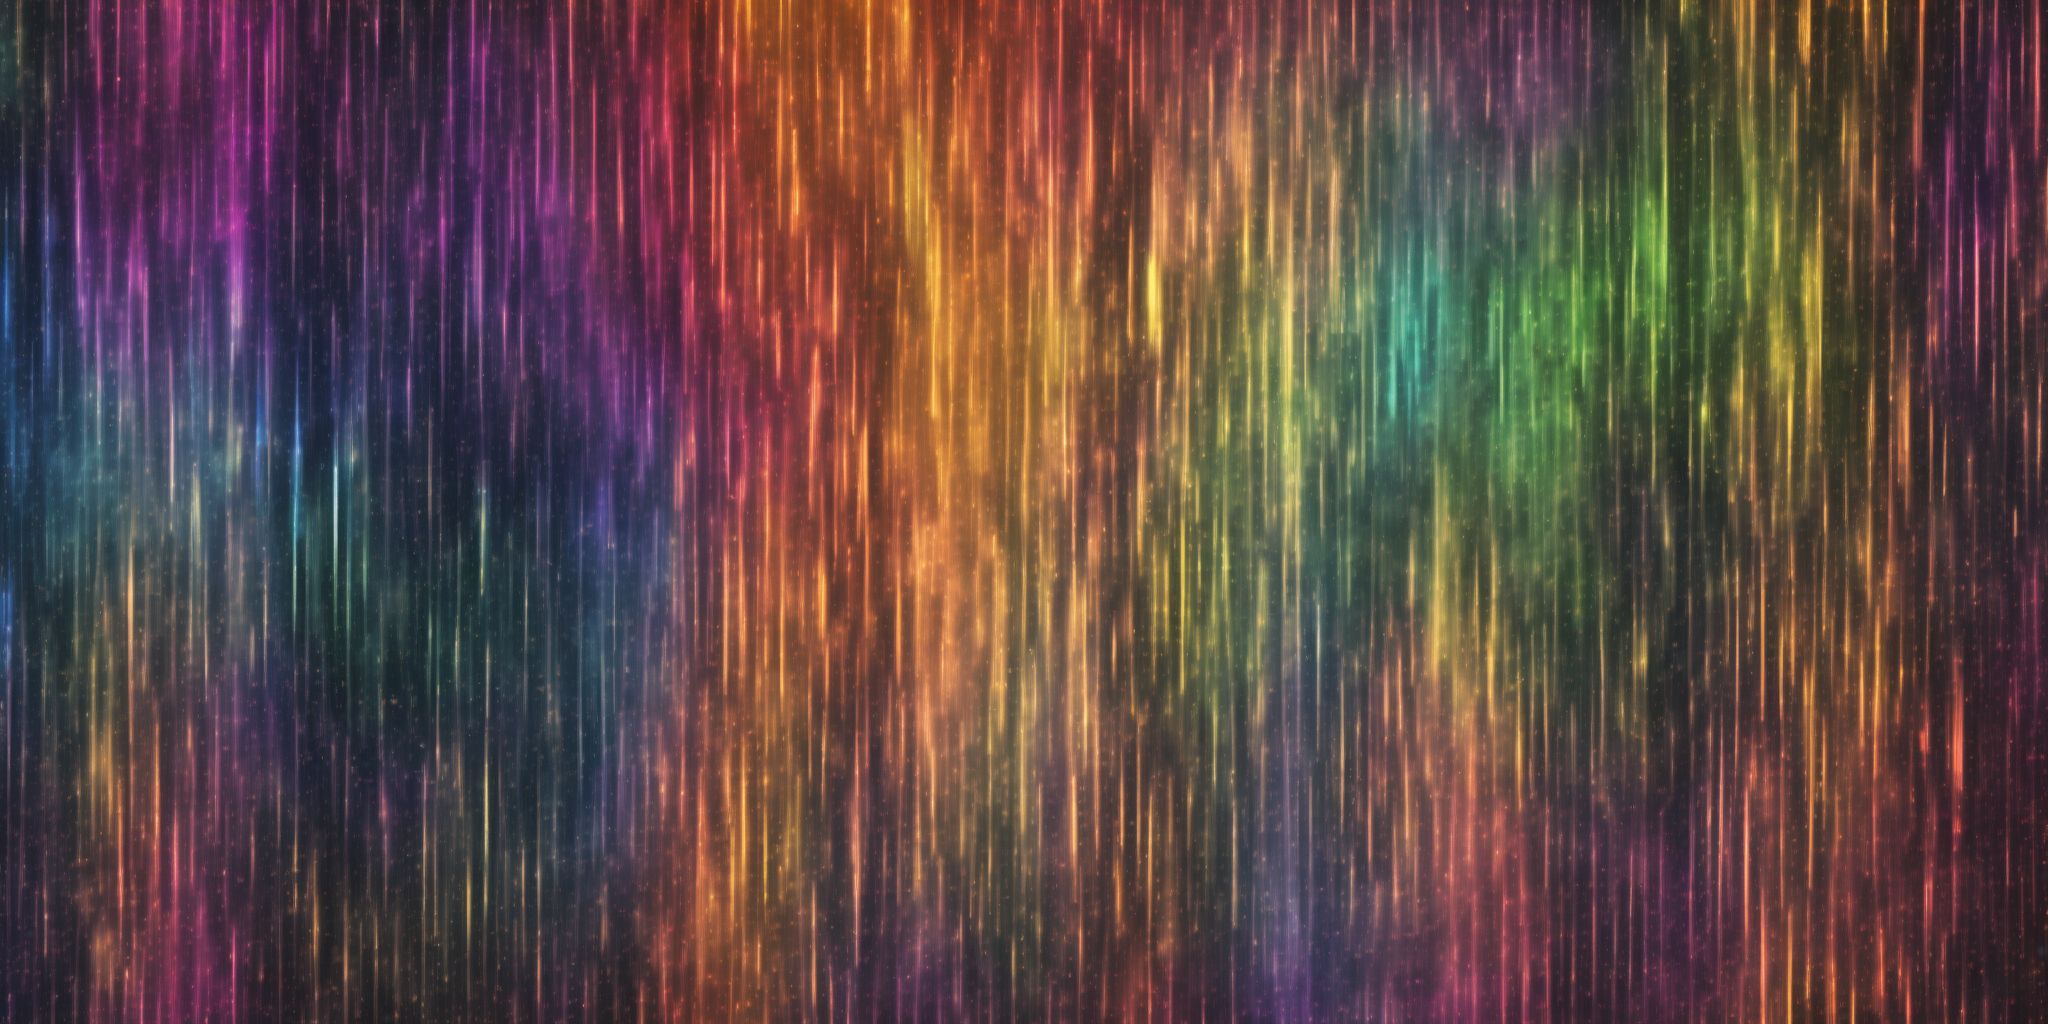 Spectrum  in realistic, photographic style